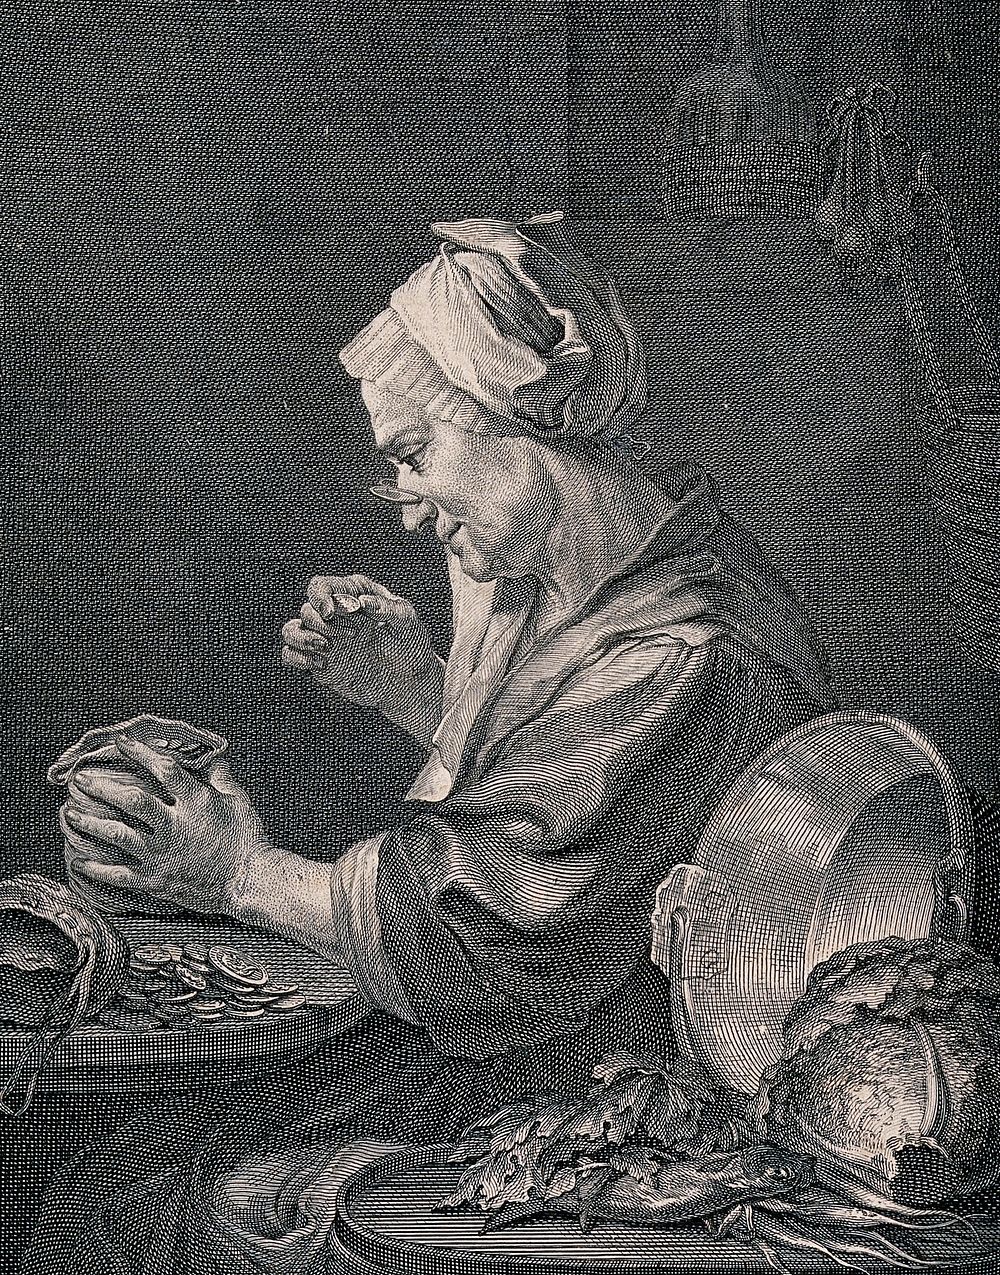 A woman is sitting in a kitchen looking closely at a coin in her hand while a bag of money sits on the table. Engraving by…